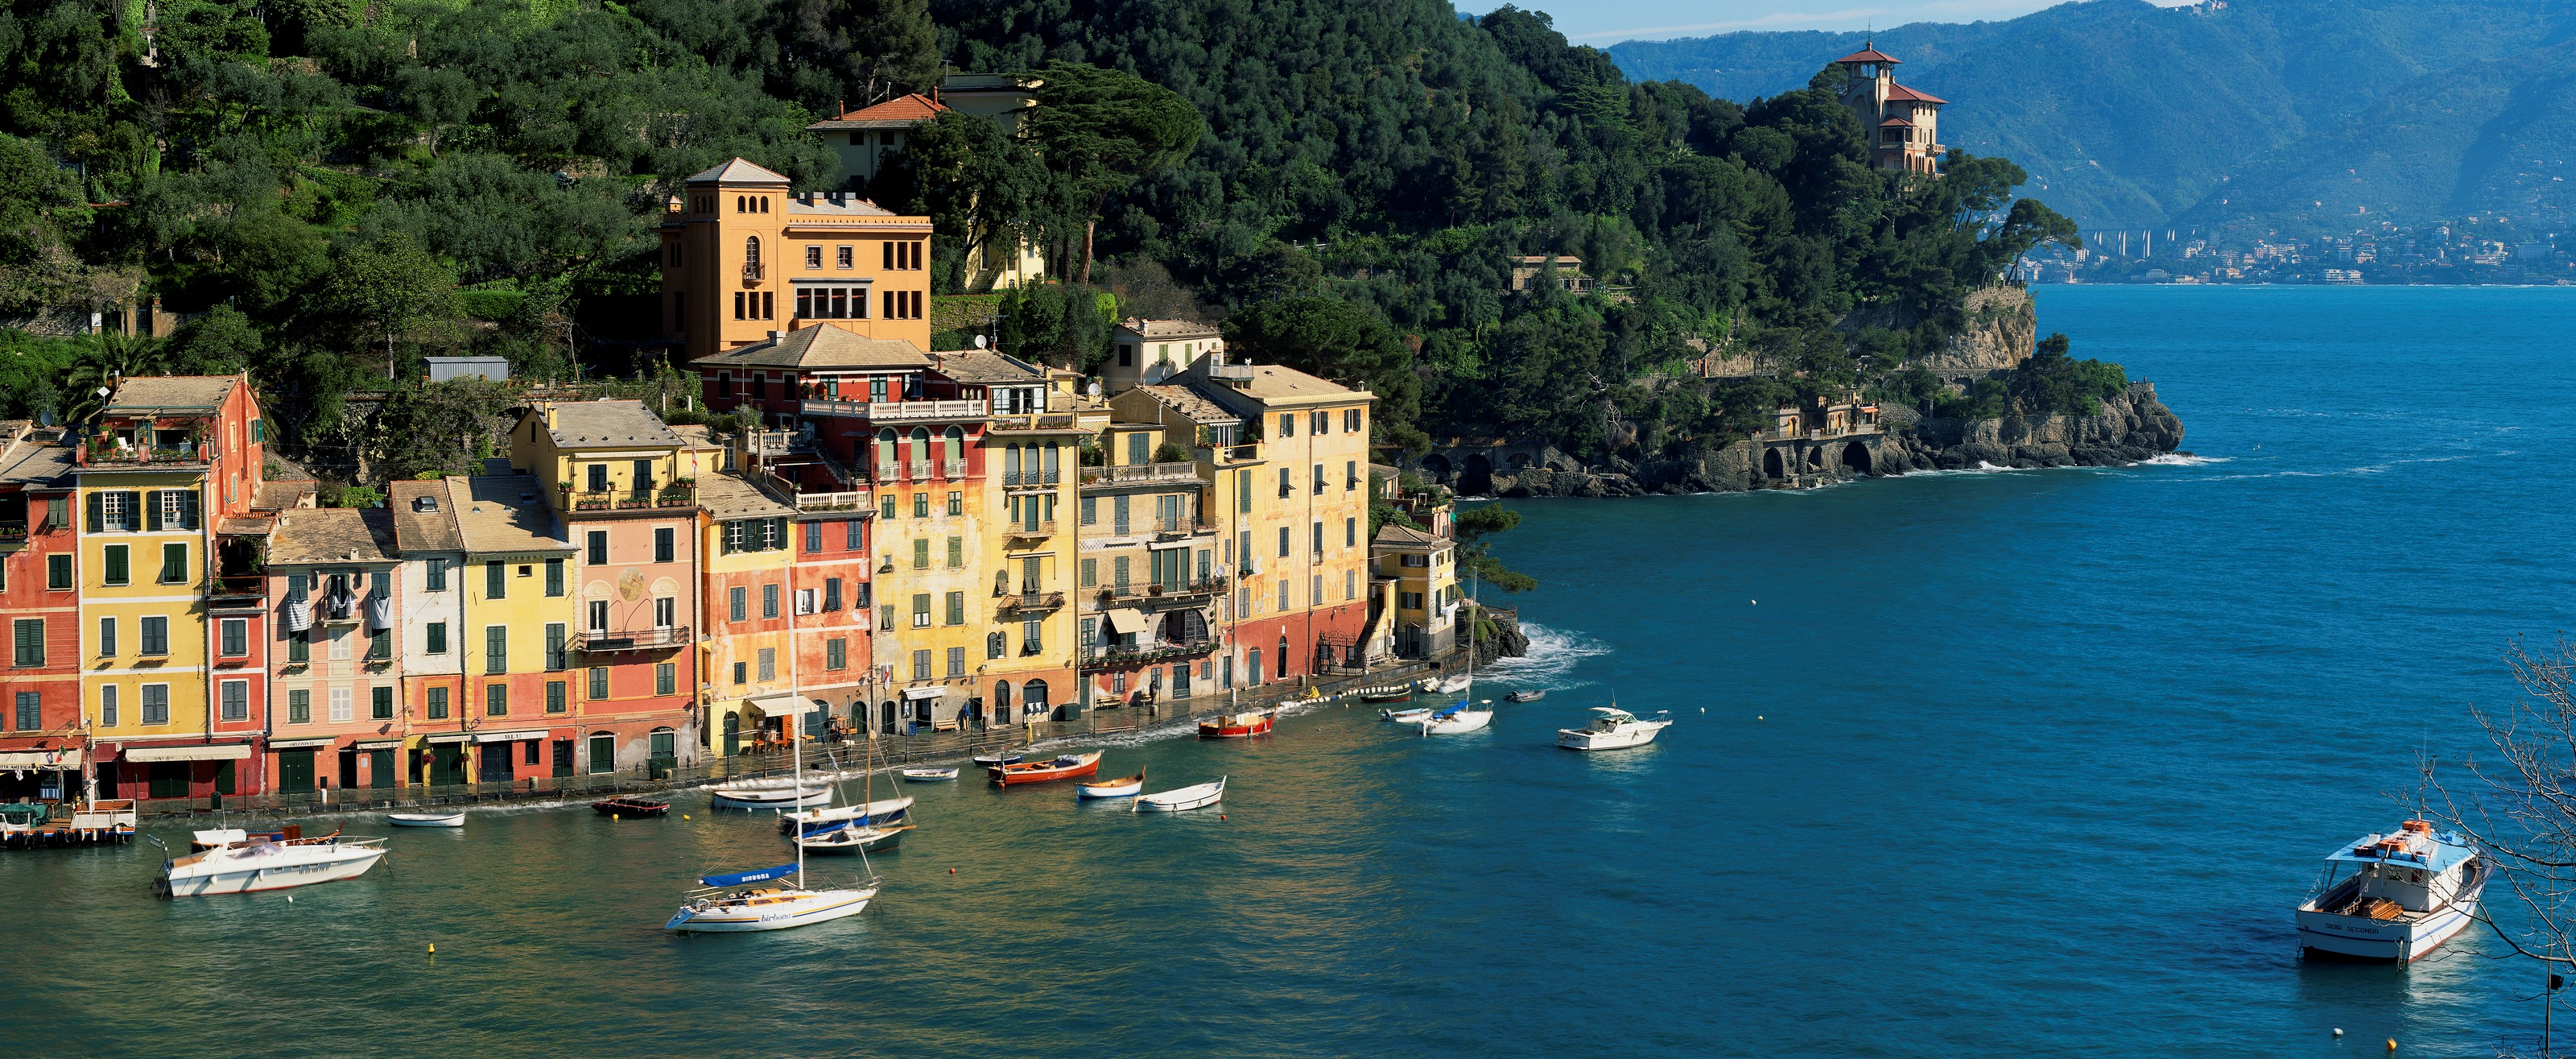 Premium Photo | Portofino town on the italian riviera in liguria and boats  and yachts in the sea harbour, italy